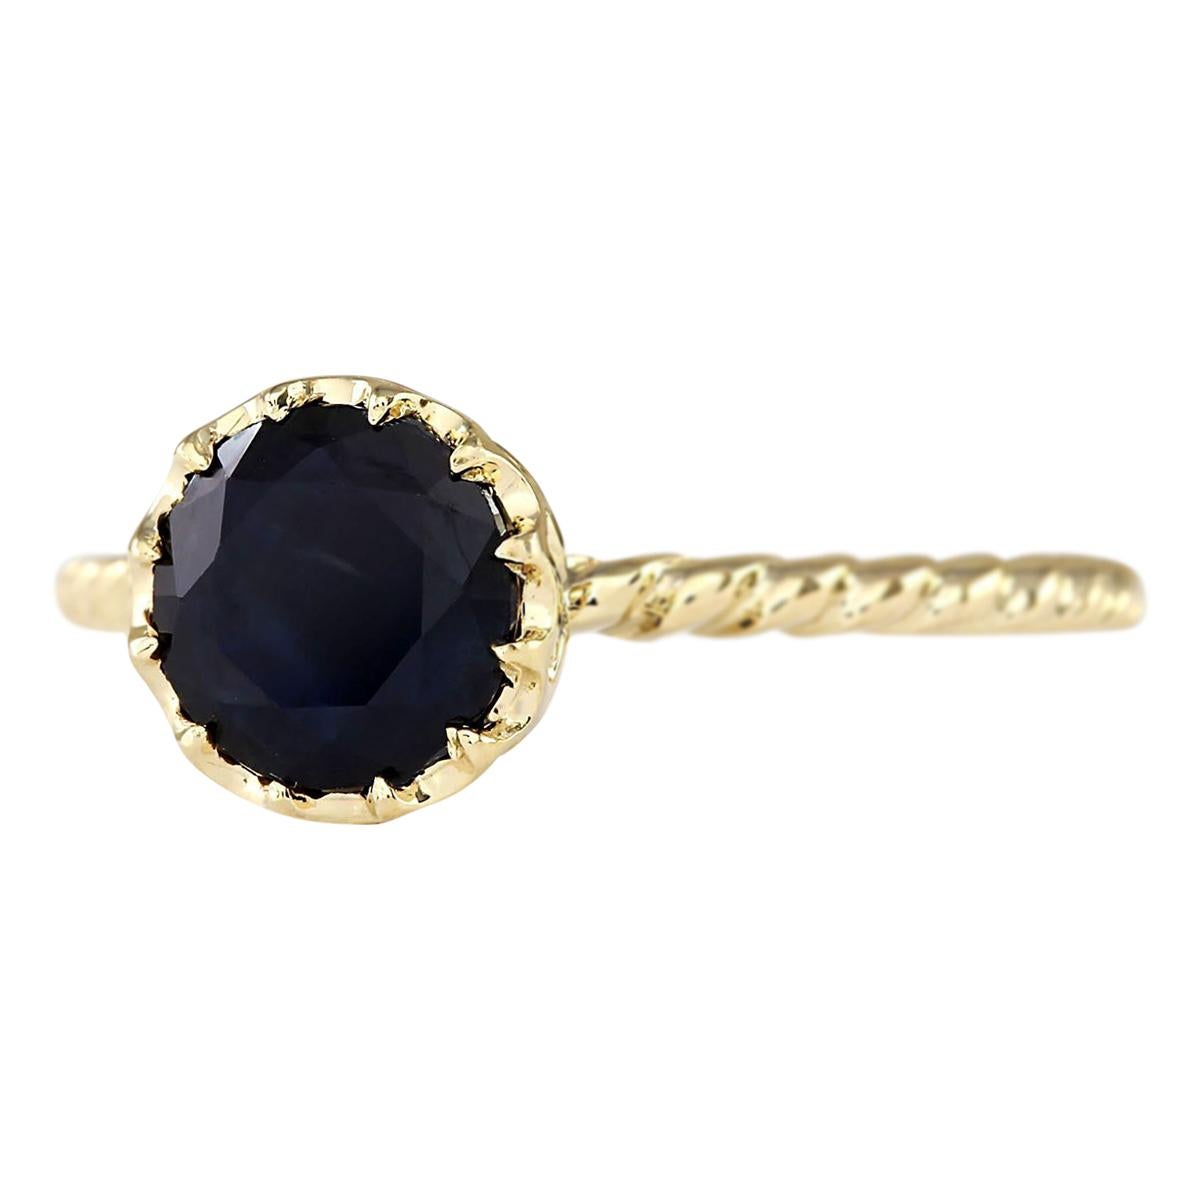 Stamped: 14K Yellow Gold
Total Ring Weight: 1.8 Grams
Total Natural Sapphire Weight is 1.30 Carat
Color: Blue
Face Measures: 7.00x7.00 mm
Sku: [703243W]